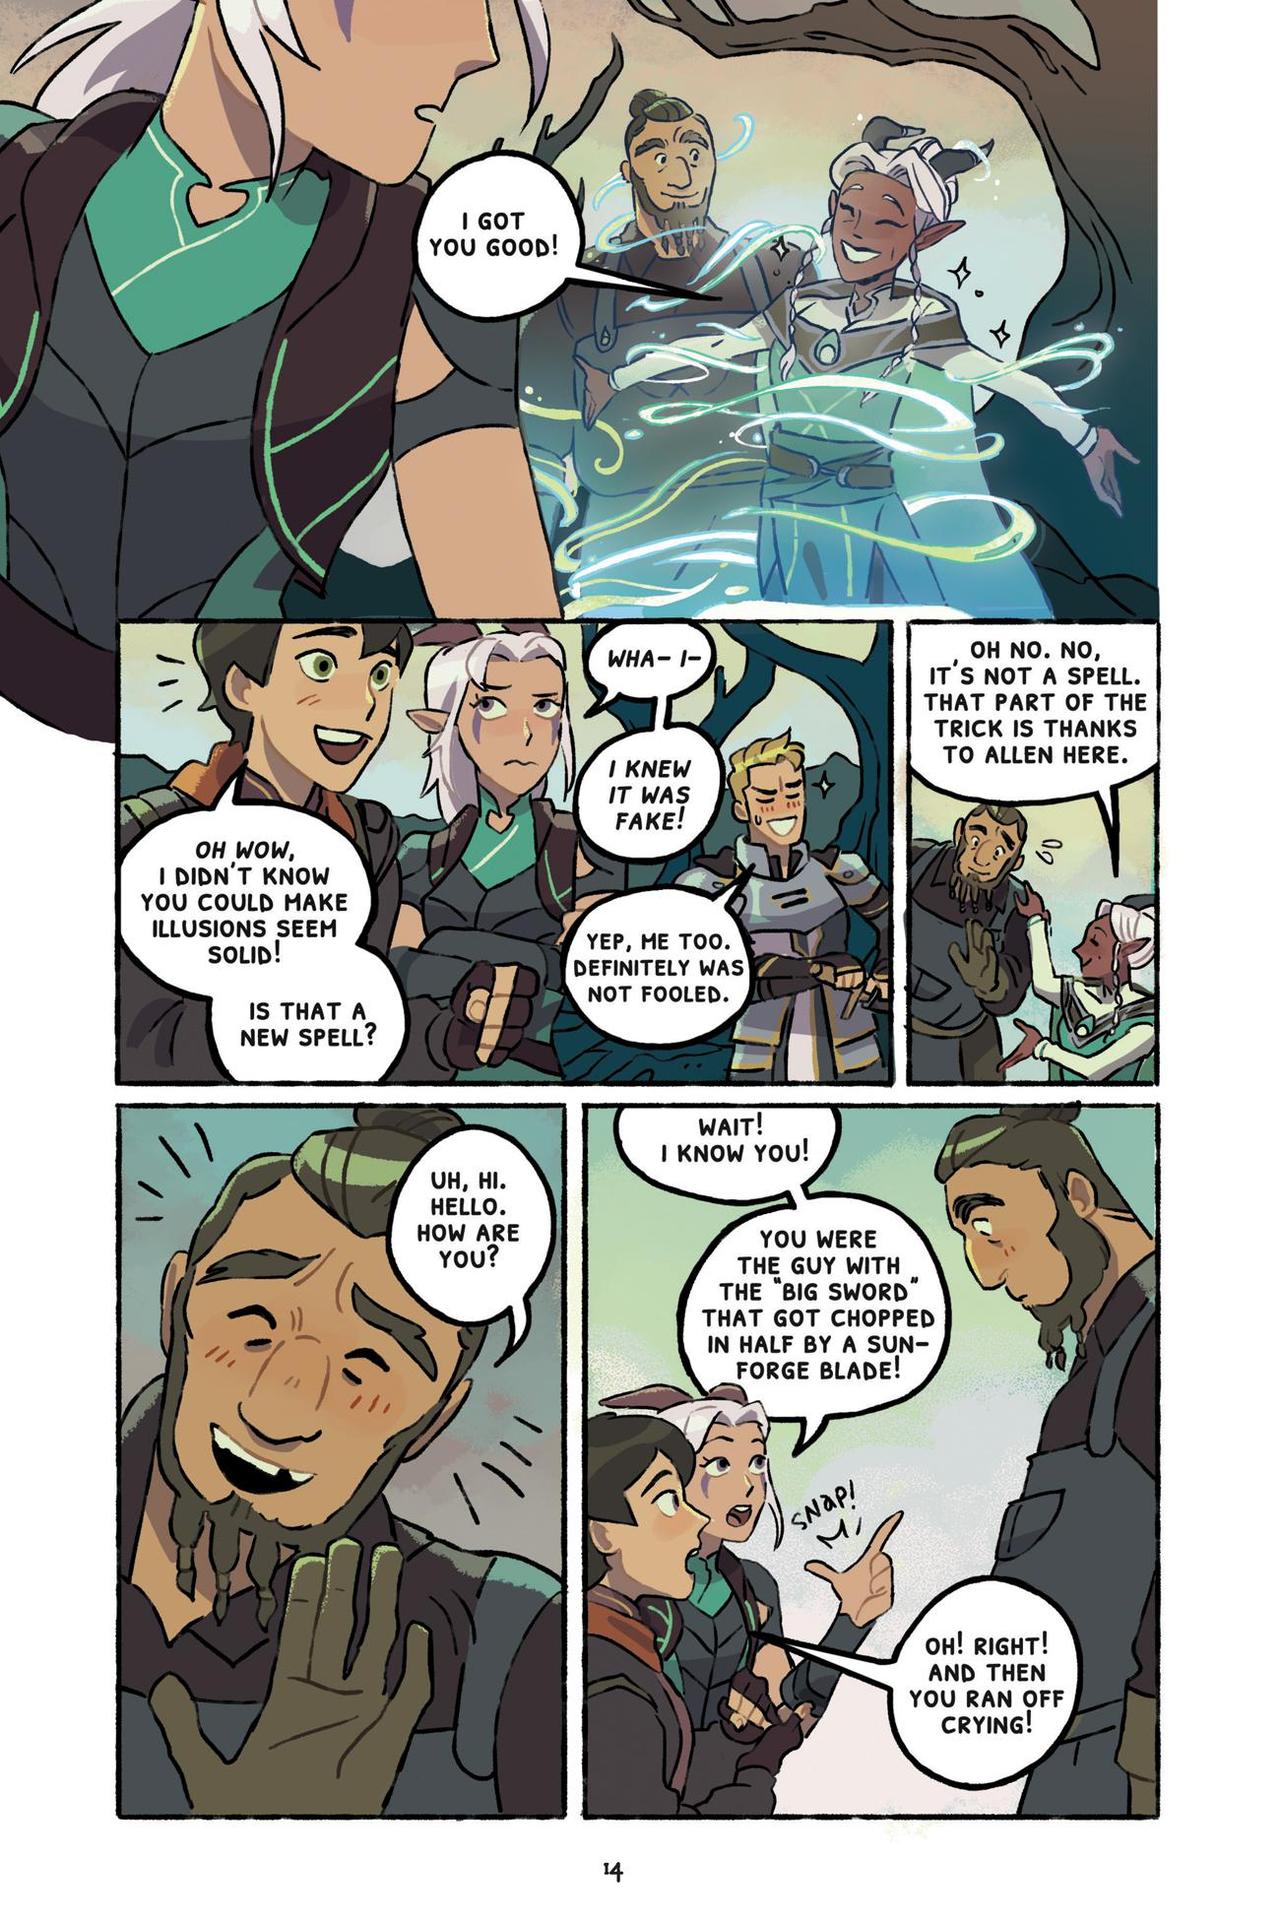 Through the Moon: The Dragon Prince Graphic Novel (2020) Chapter 1 - Page 18